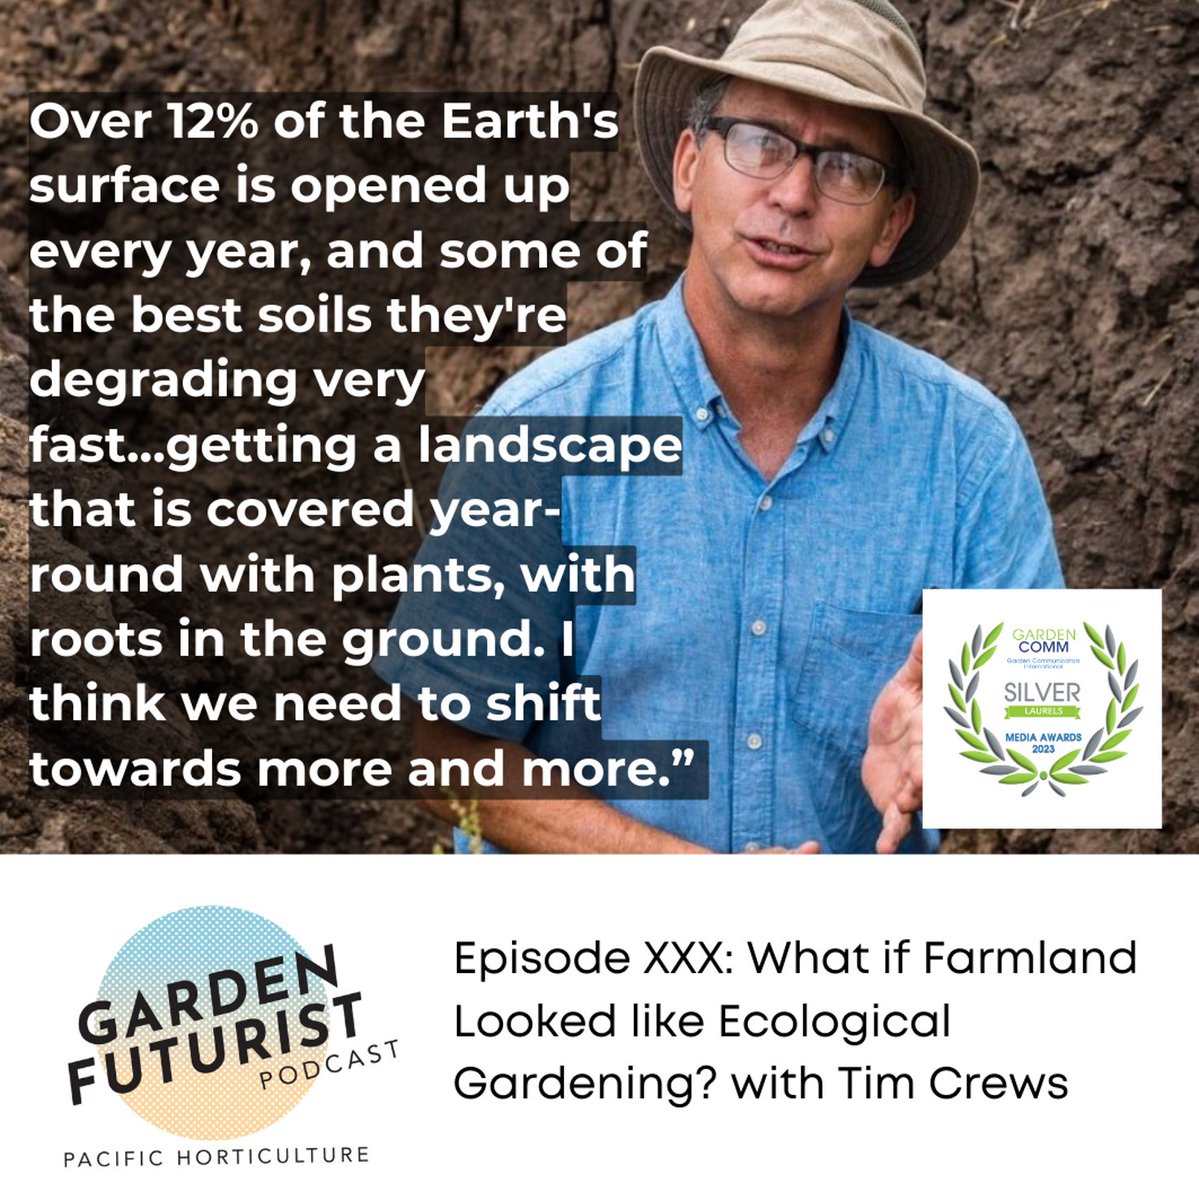 Thank you #GardenFuturist Podcast fans for helping us grow! We are proud winners of the 2023 GardenComm Silver Laurels Award. Check out our latest – the 30th Episode!
#agroecology #perennialcrops
#gardening #climateresilience #biodiversity #ecology